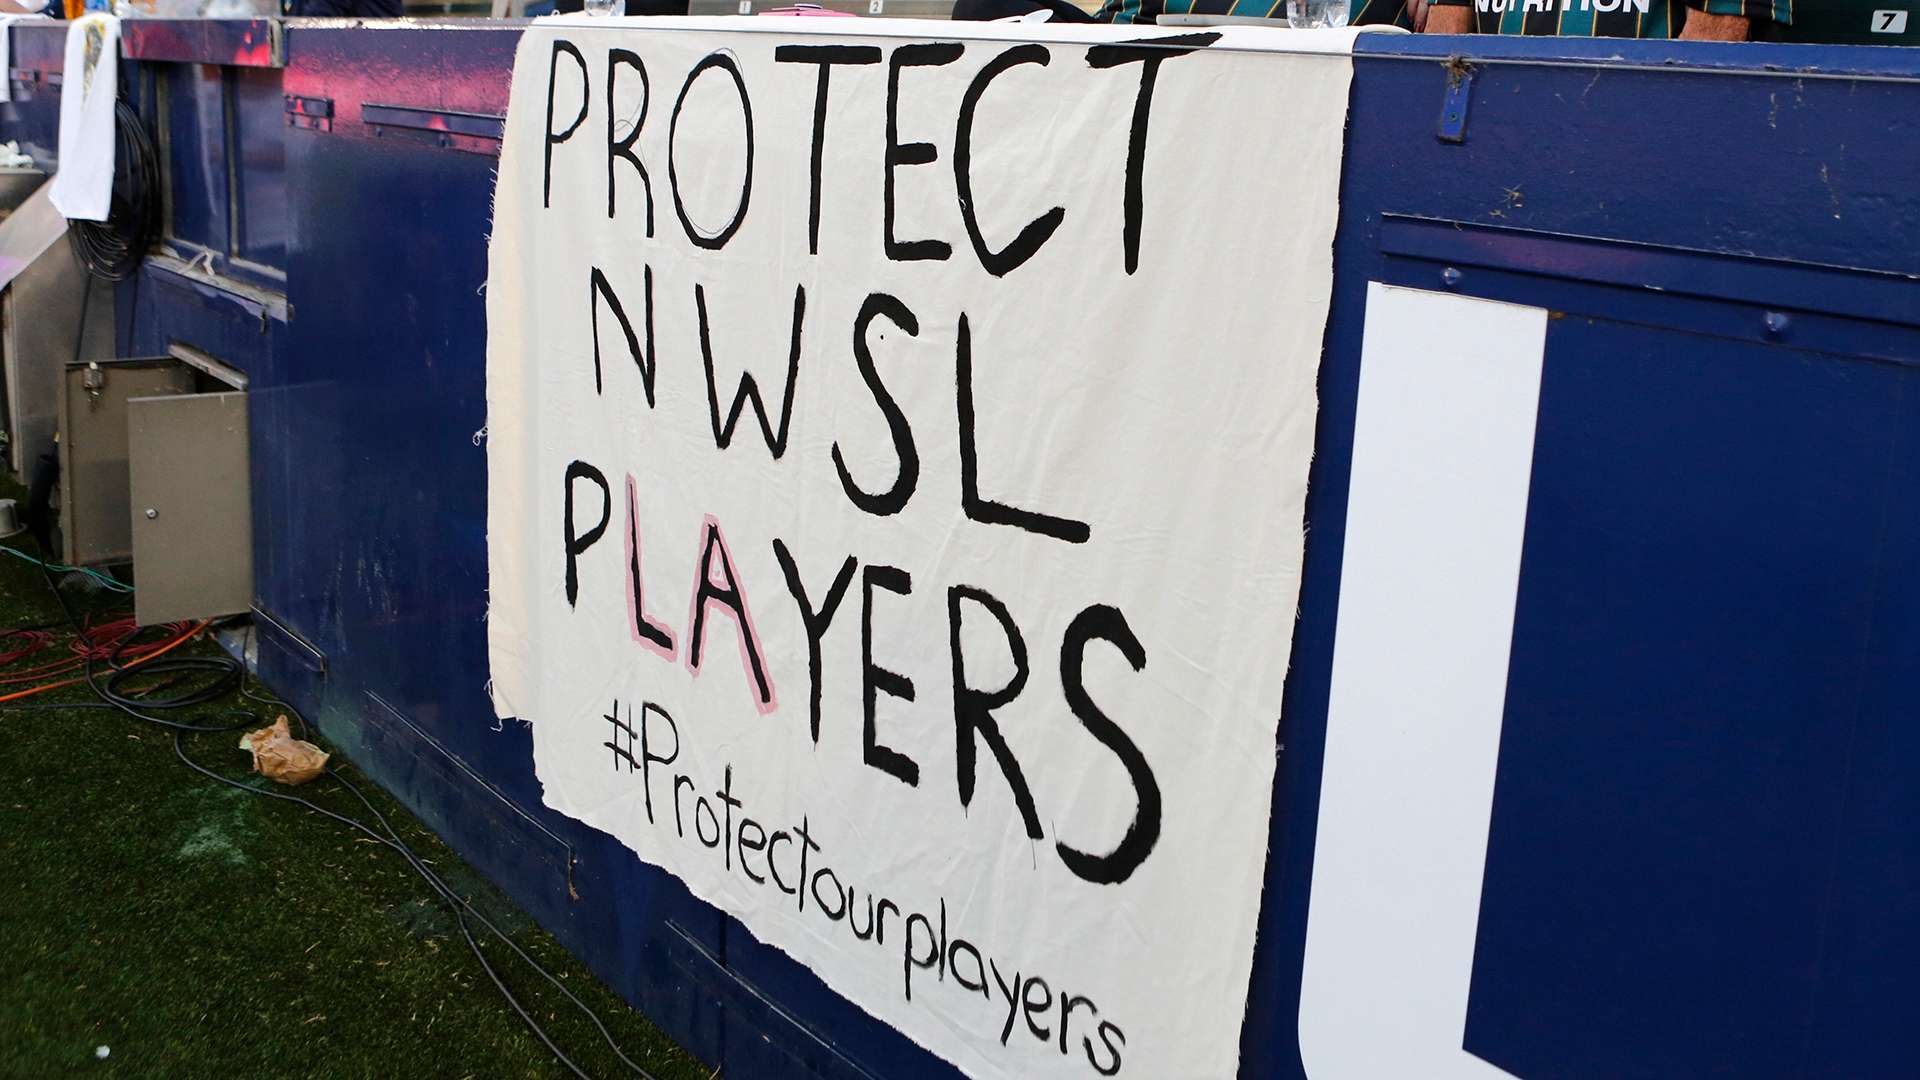 NWSL support sign